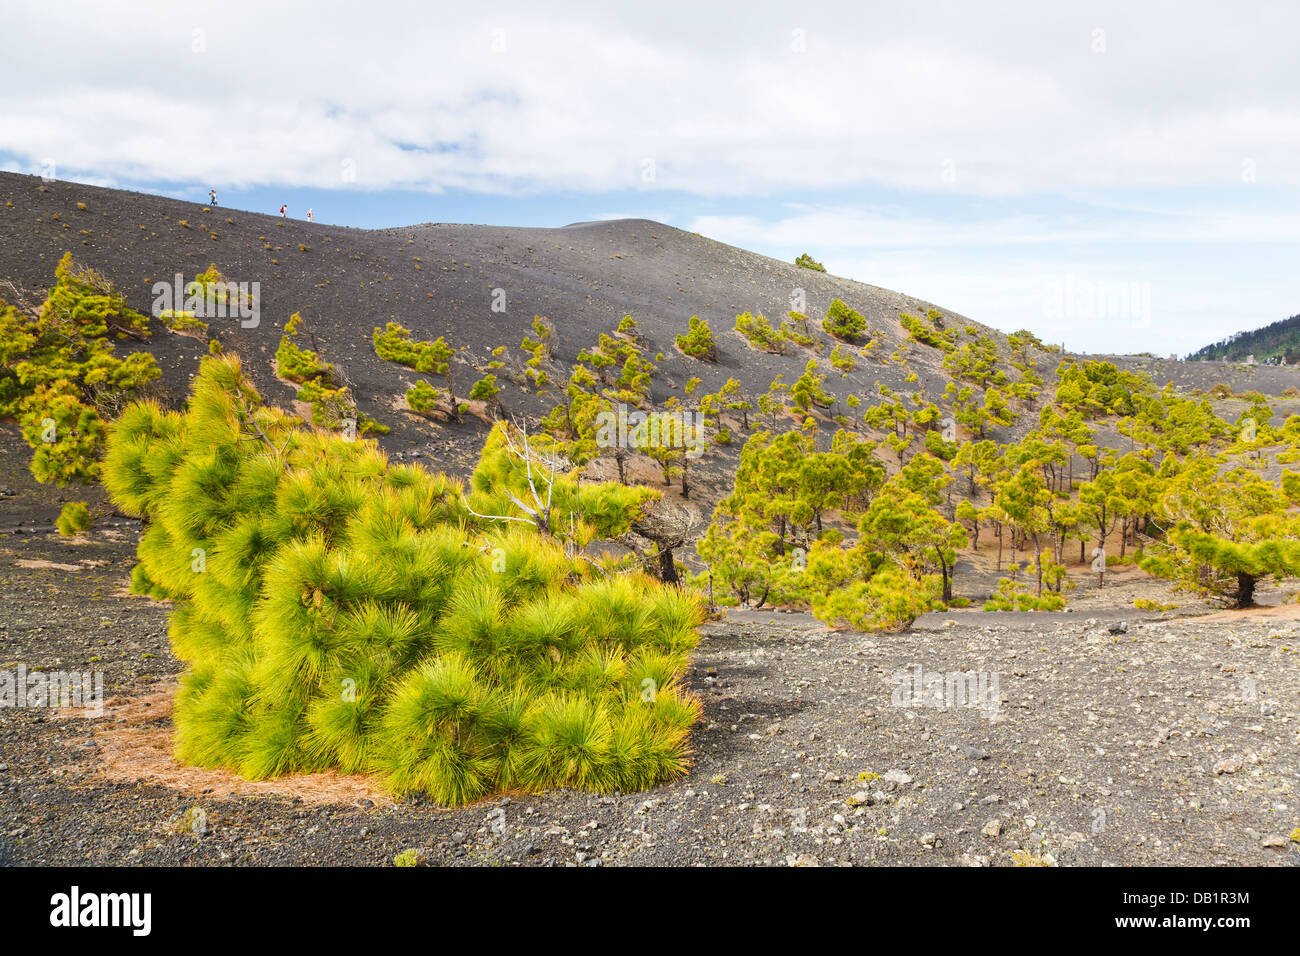 Volcán San Antonio with a light pine tree forest in the foreground. Stock Photo